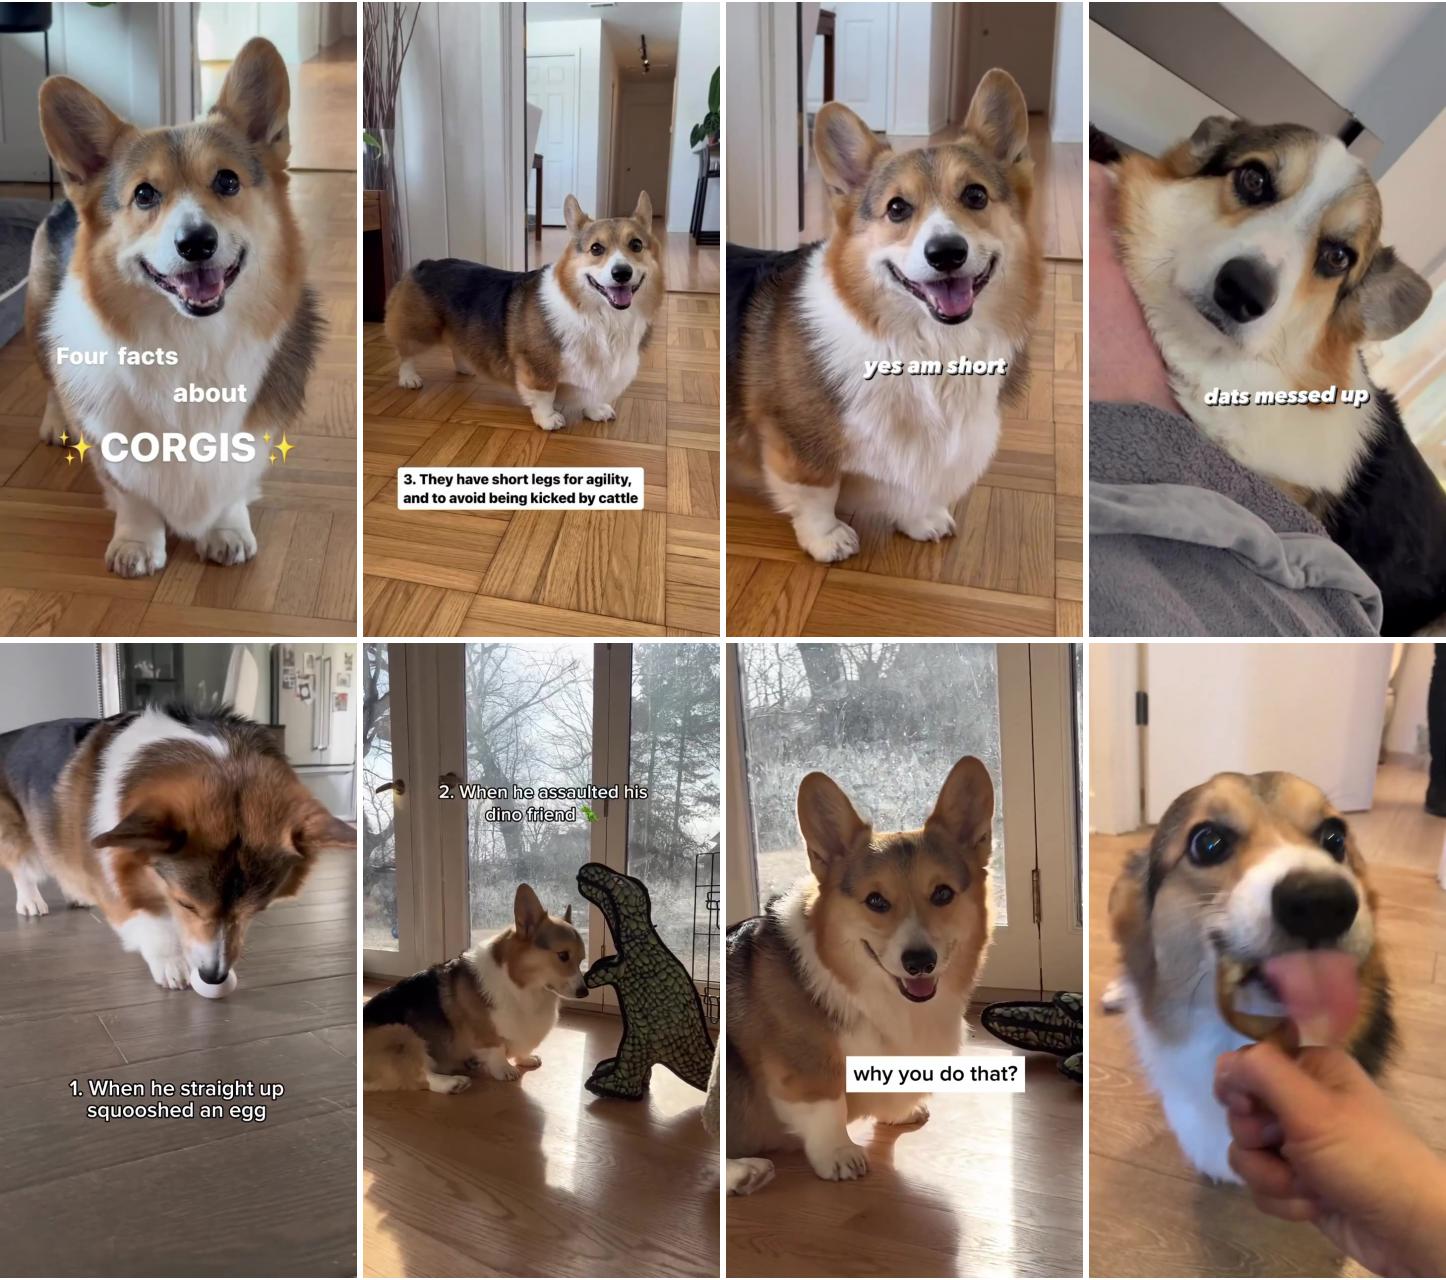 Happy national corgi day here are four facts about the breed; 3 occasions my corgi chose violence